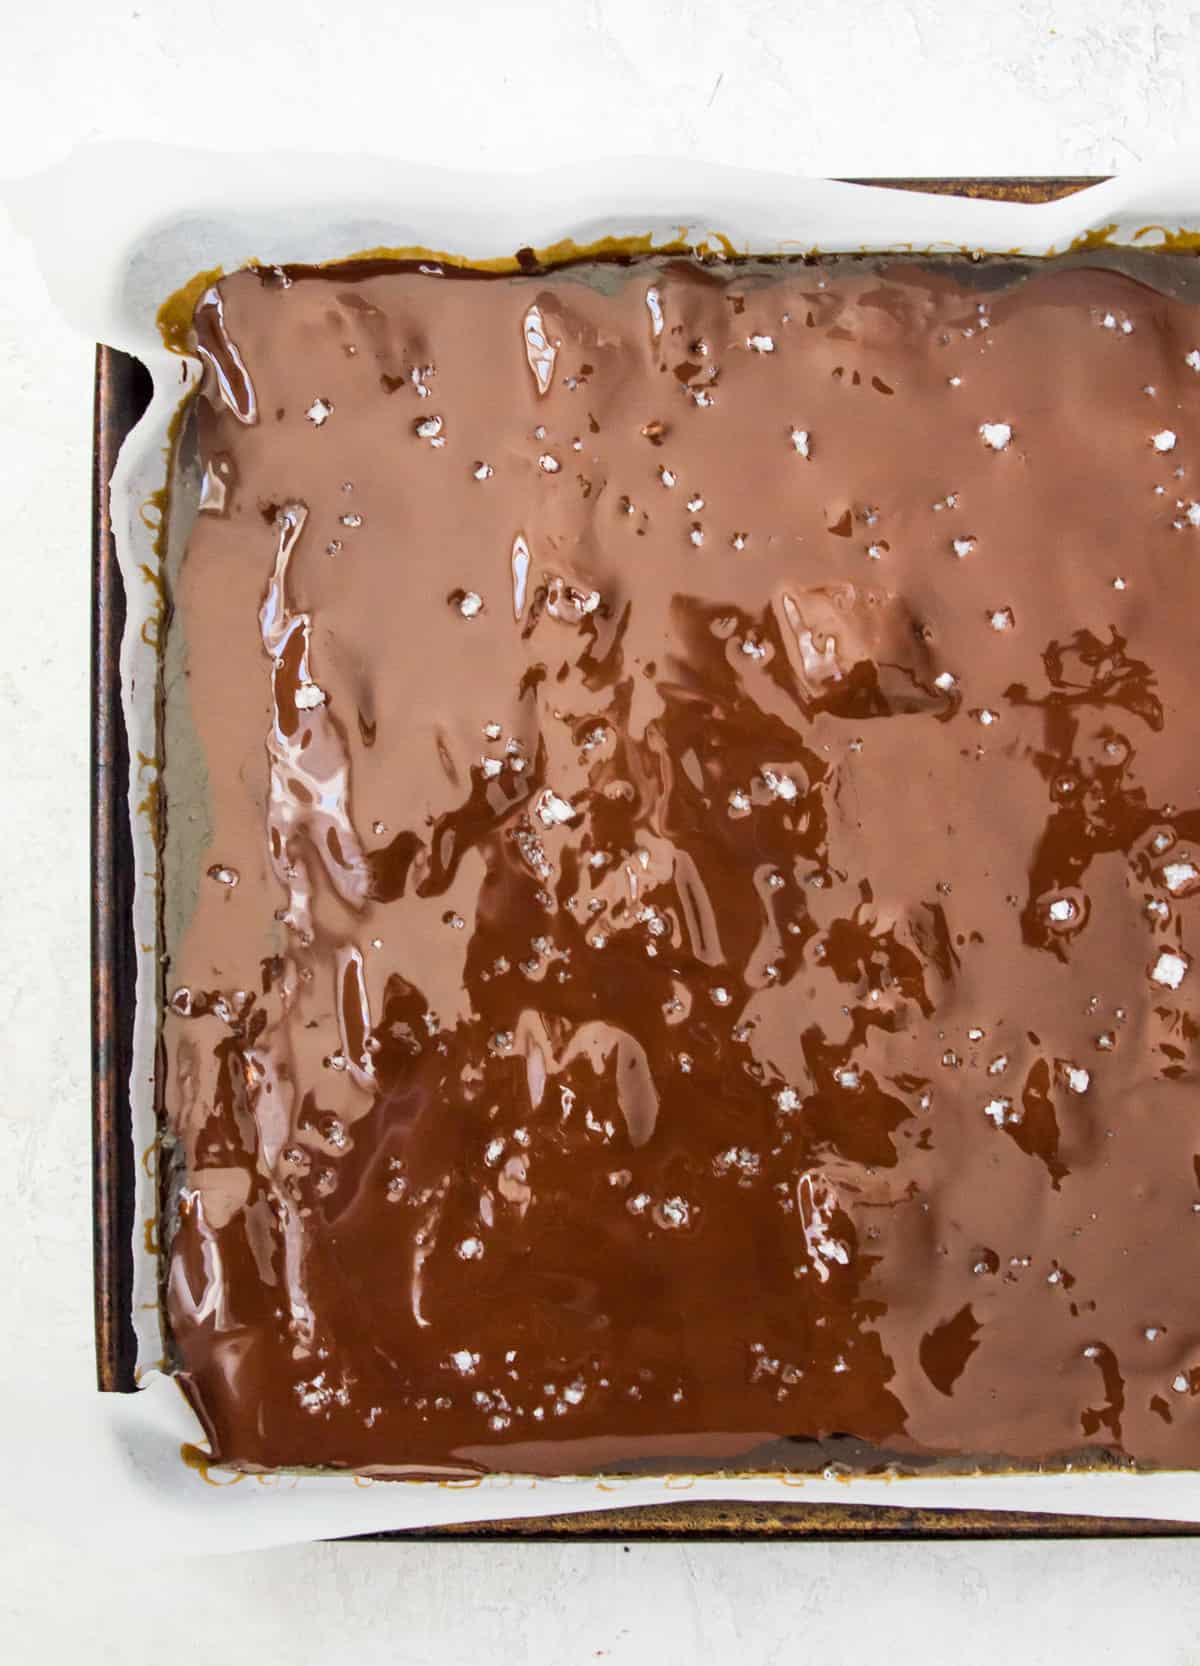 Dark chocolate spread out on a baking sheet lined with parchment paper.